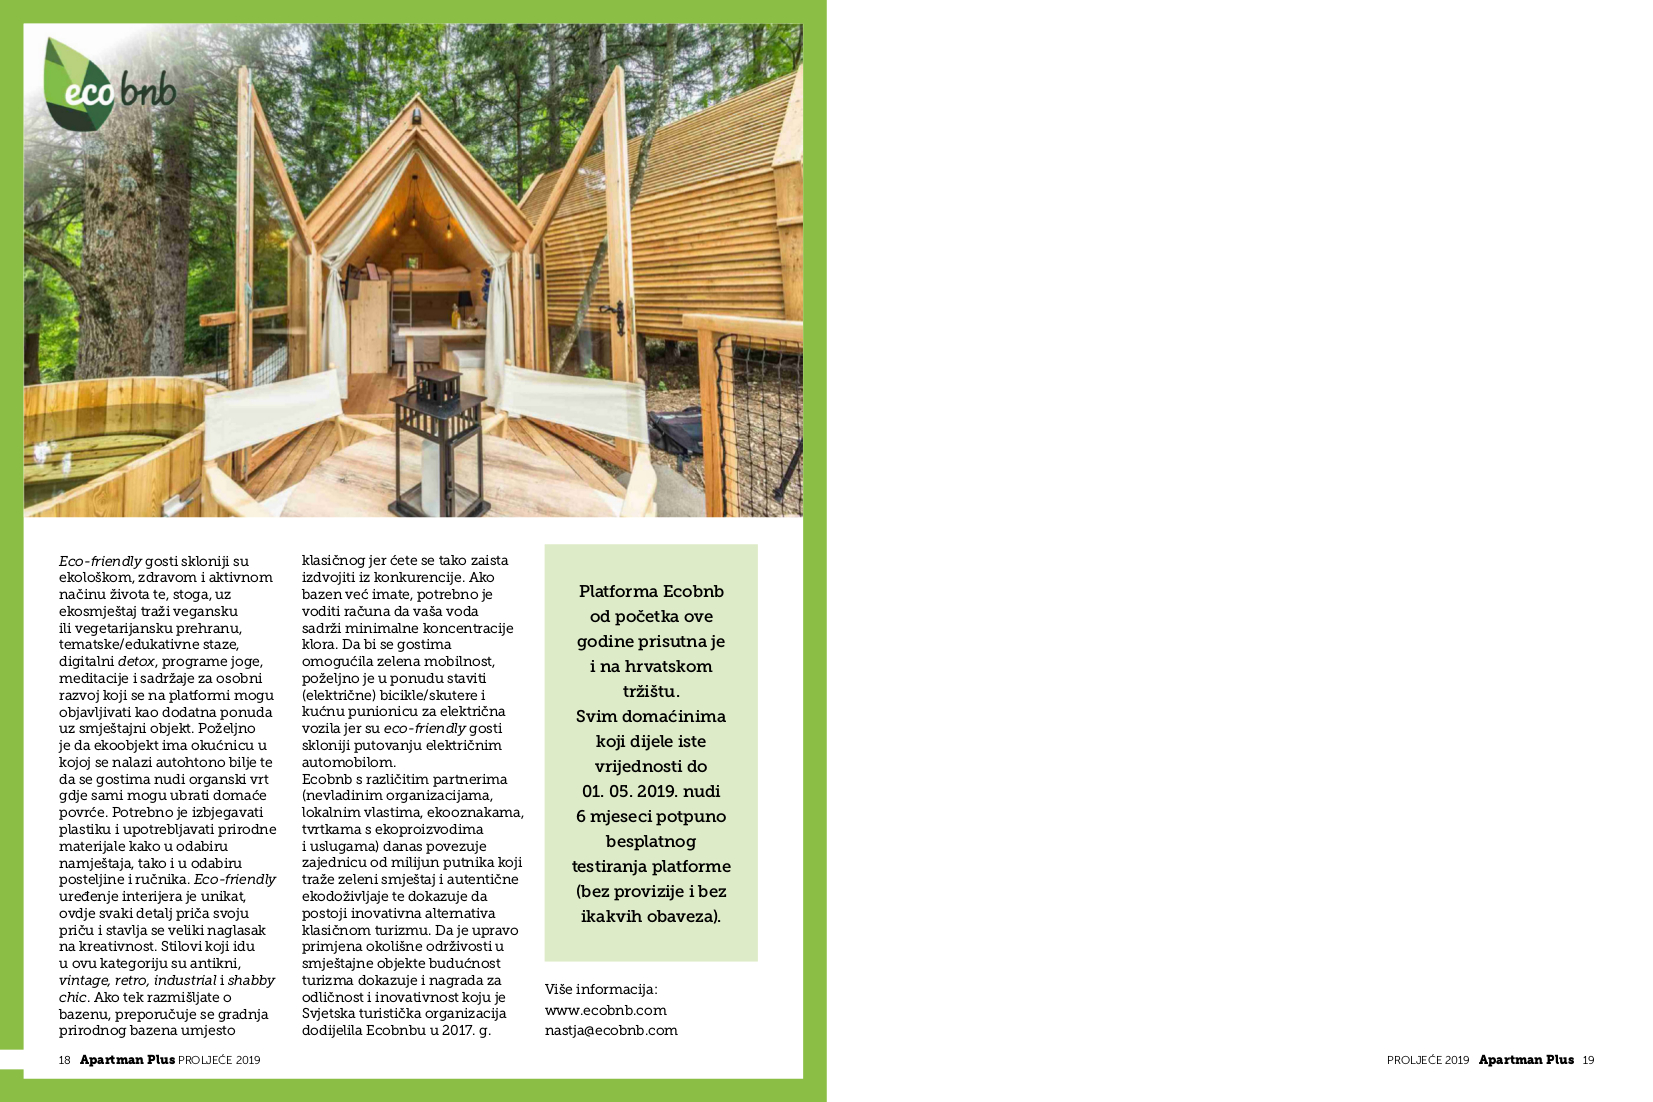 The article about Ecobnb, published on the Croatian magazine Apartman Plus